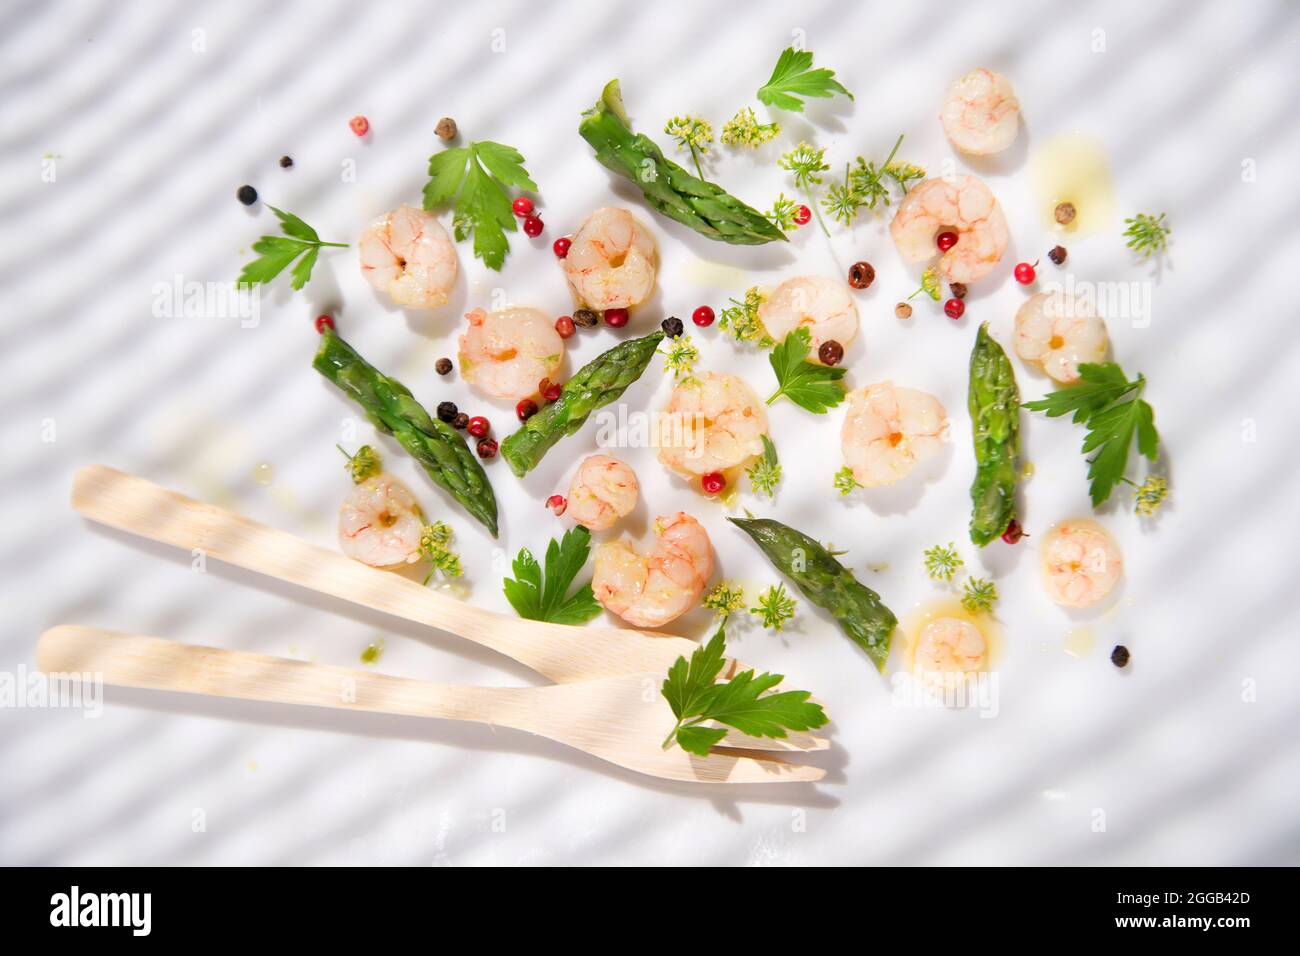 Presentation of a second dish of shrimp and asparagus tips Stock Photo